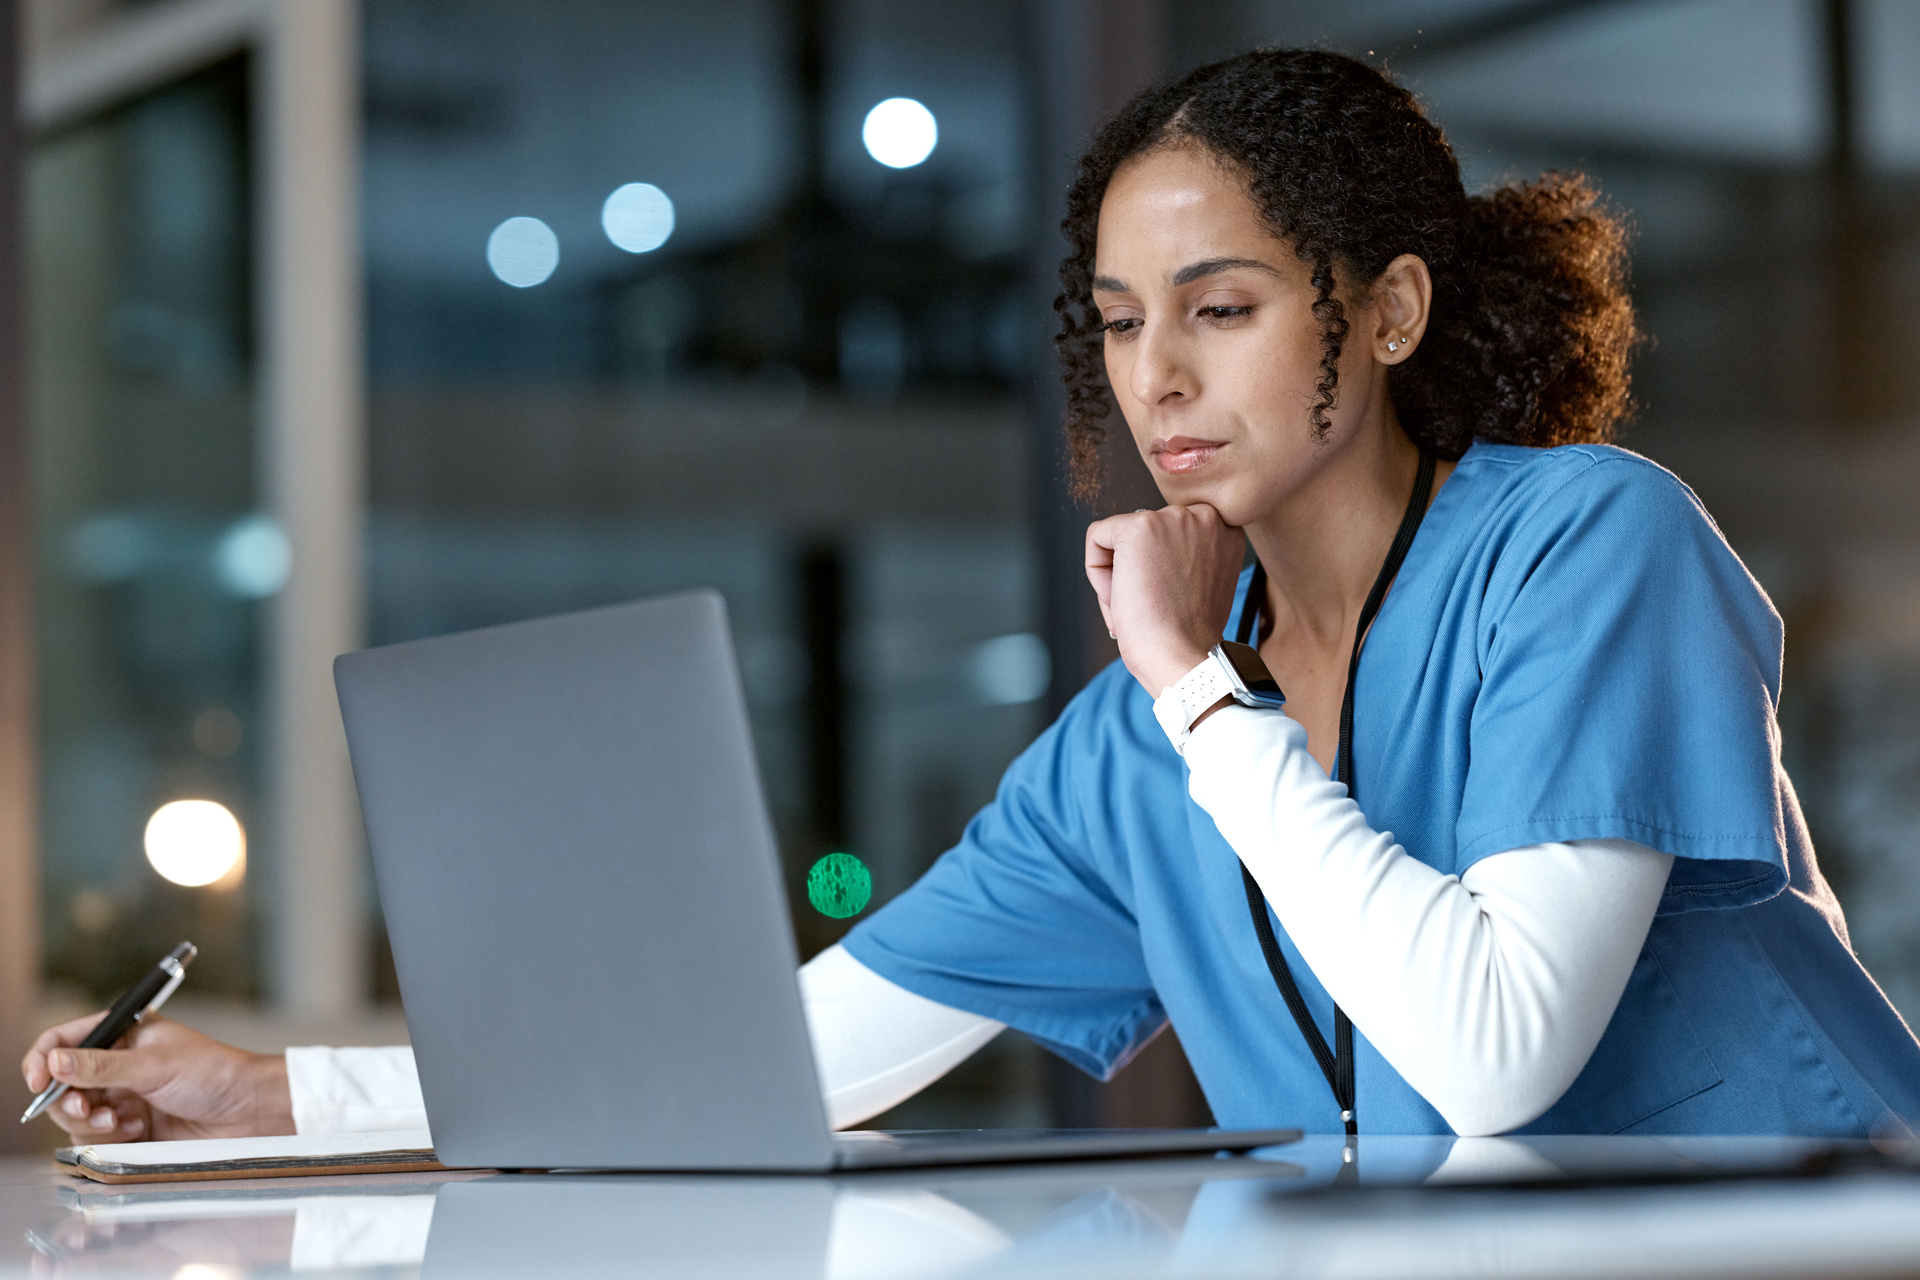 Nurse working on a laptop learning about clinical judgment 